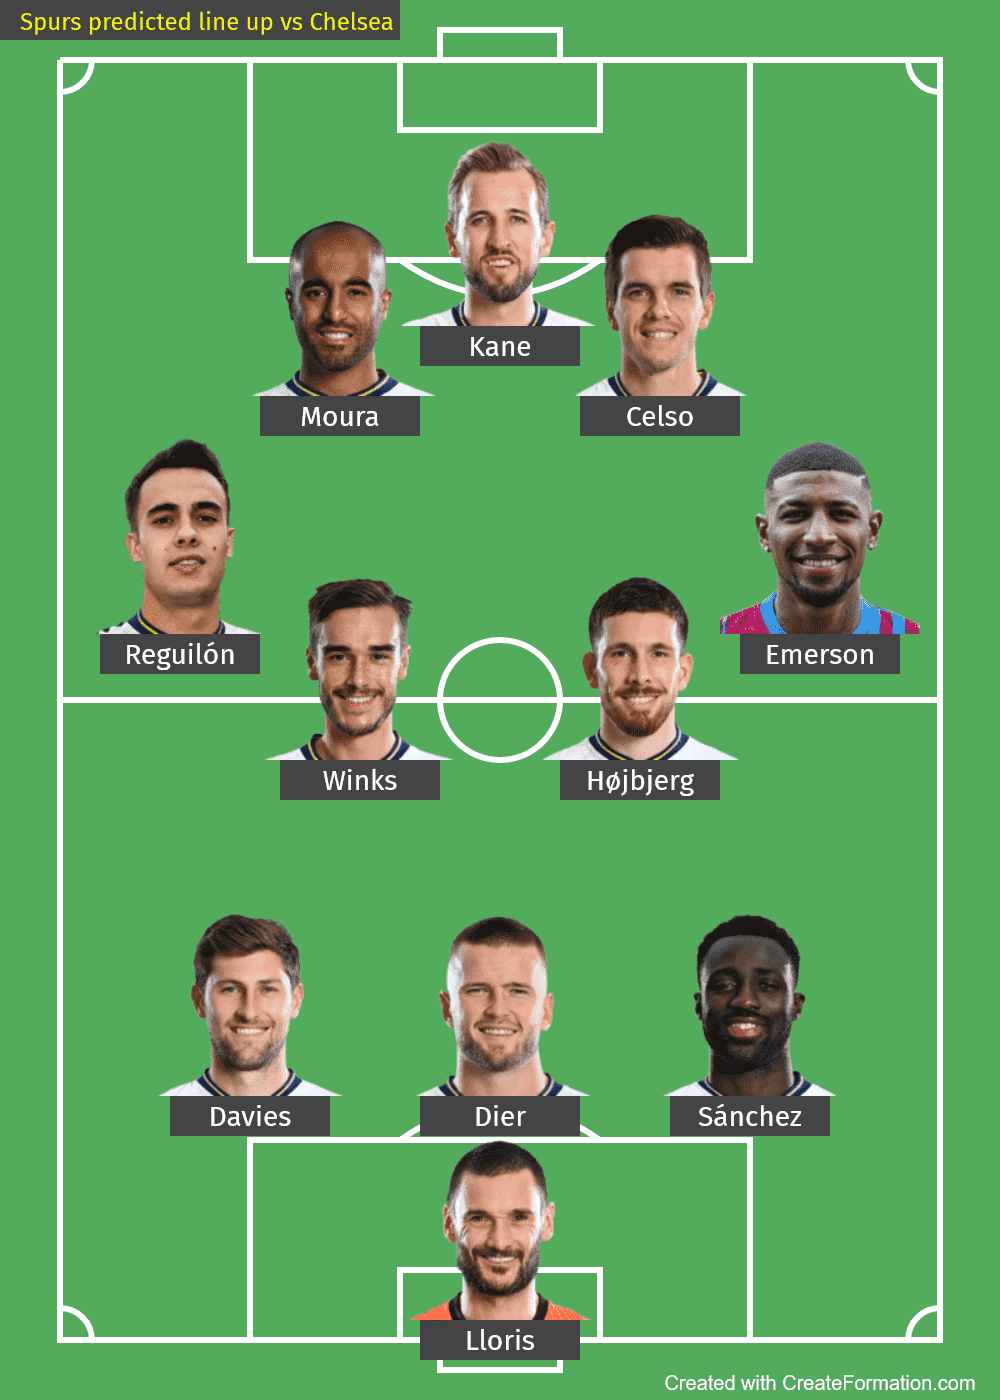 Spurs predicted line up vs Chelsea-2022-EFL Cup-2nd Leg